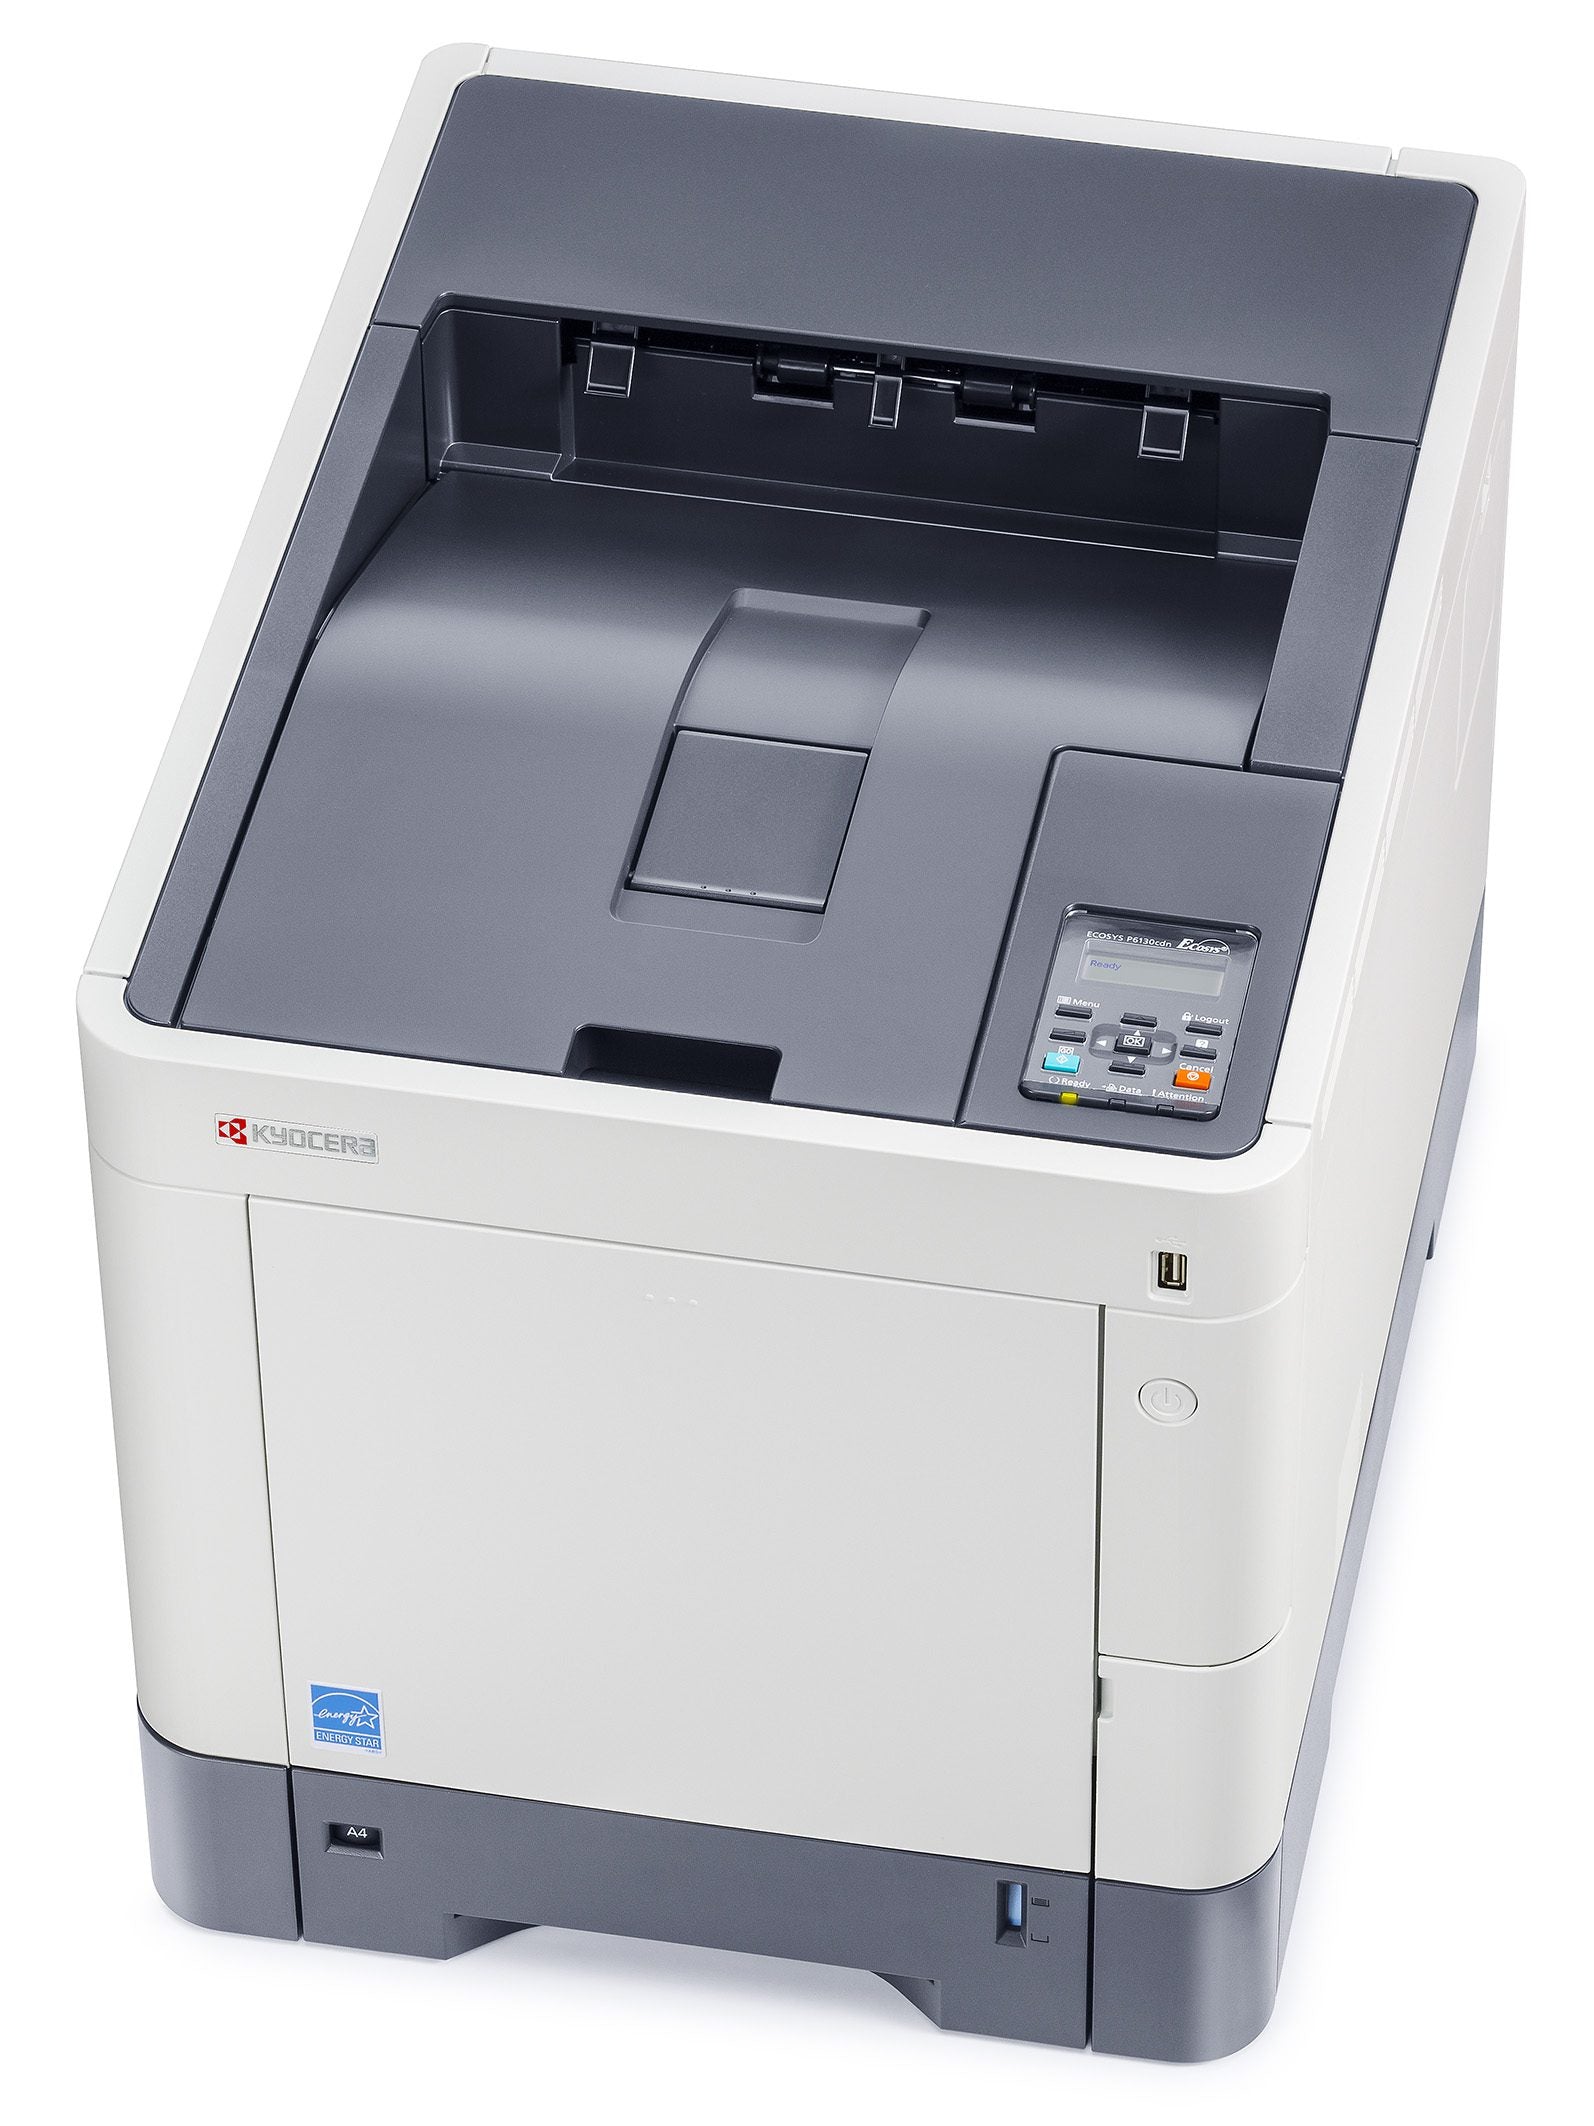 KYOCERA ECOSYS P6130cdn A4 COLOR LASER PRINTER 30PPM Network and automatic duplex